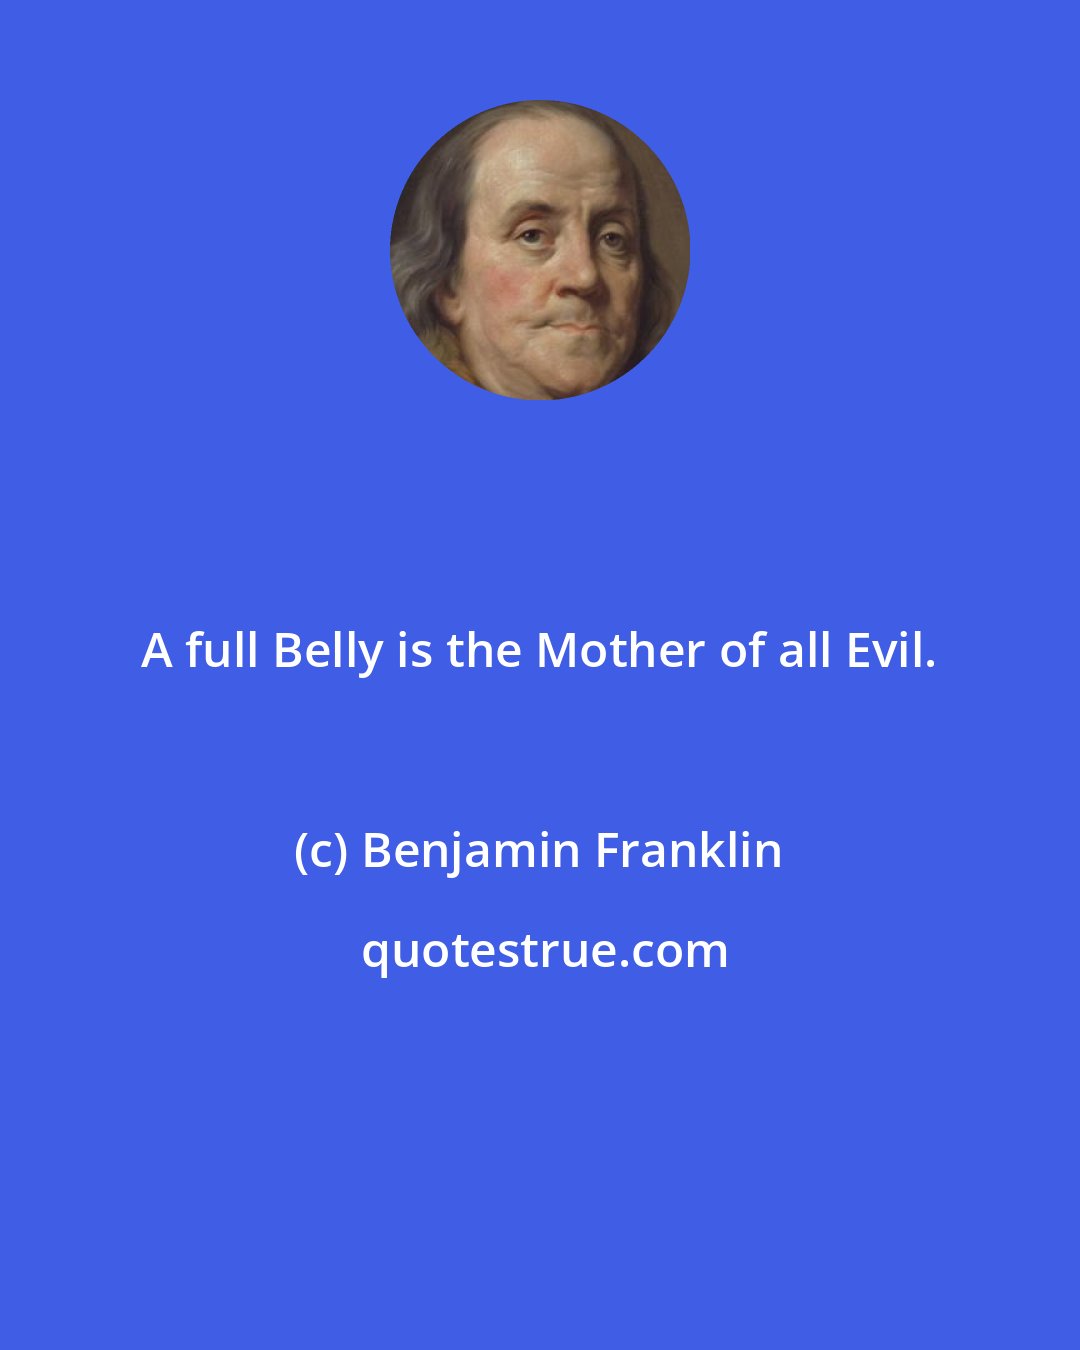 Benjamin Franklin: A full Belly is the Mother of all Evil.